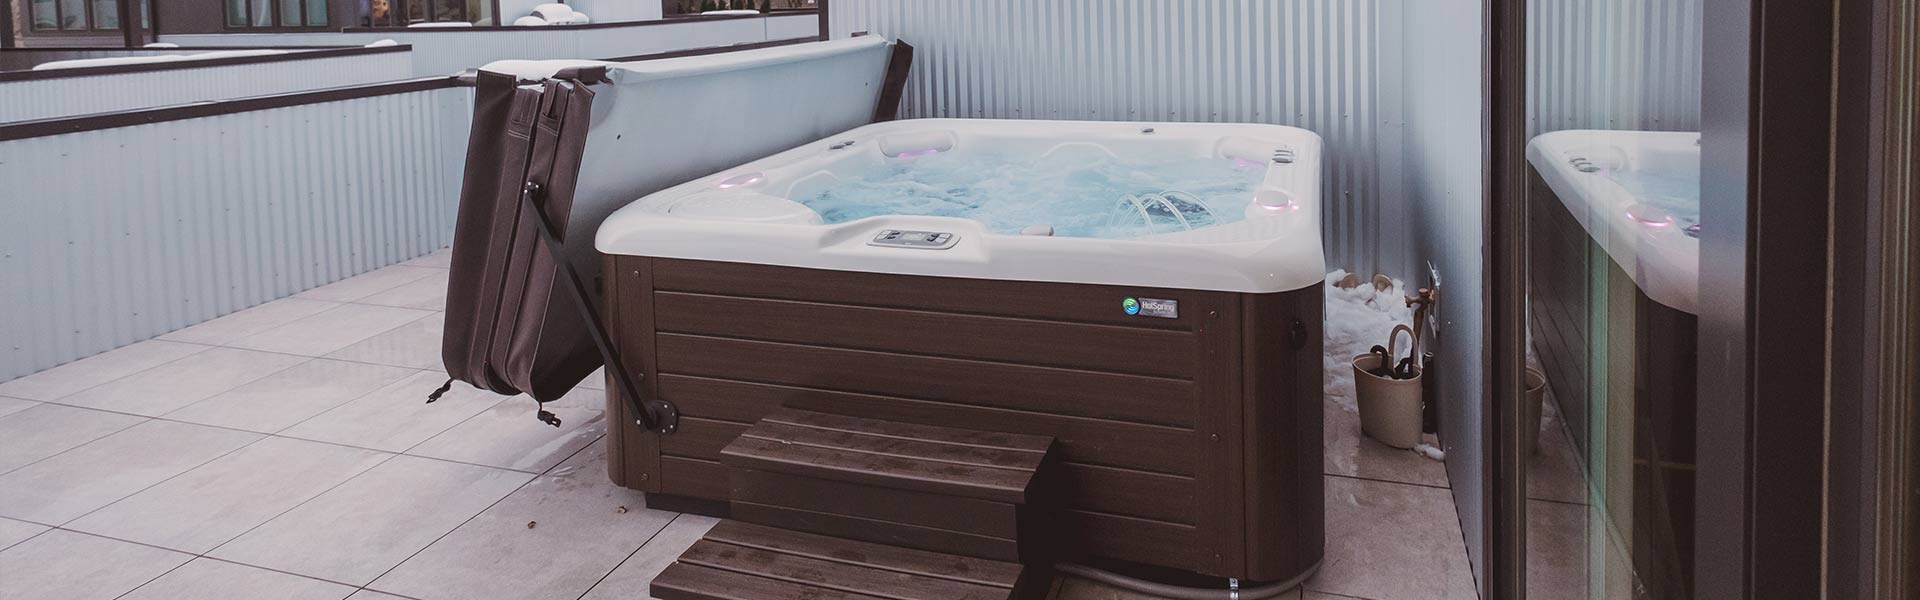 Protecting Your Hot Tub In The Rain And Other Inclement Weather